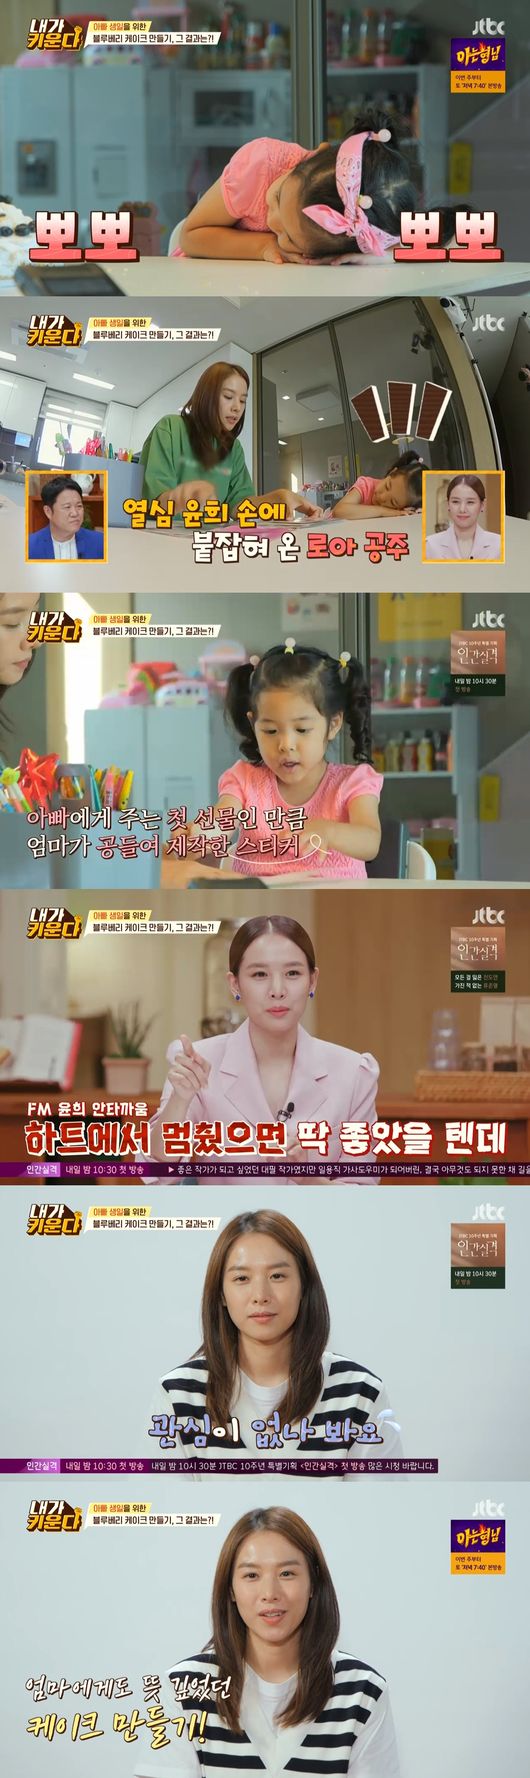 Jo Yoon-hee told the story of her ex-Husband Lee Dong-gun.On JTBC I Raise broadcasted on the 3rd, Jo Yoon-hee was shown preparing a birthday Cake for her ex-Husband Lee Dong-gun with her daughter Roa.On this day, Jo Yoon-hee made a birthday Cake of Dong-gun with blueberries and handmade cream made with his daughter Roa.Jo Yoon-hee said, I am taking good care of my familys birthday, but Roa had the idea that she should live away from her father and take better care of her.Jo Yoon-hee said, I have never made Roah uncomfortable with my Father. I ask him what he will do before meeting my Father on the weekend.So it was not a burden to me to make my Fathers birthday Cake. Kim Hyun-sook praised it as a new woman. Jo Yoon-hee tried to make a Cake that he thought was FM, but Roar, who was free, made a completely different visual Cake and made the surroundings.Jo Yoon-hee told Roa, I would be really surprised if my Father said this Cake Roa made it.Roa used blueberries to create caterpillars that attracted attention. She used Jo Yoon-hees power to decorate her cream, but it was overRoarded and she laughed.Jo Yoon-hee said, My expectation is that I will not cry because I am clumsy and cute and I am impressed by the Cake, but if I get it, I think I think the Cake is a little scary.Cho then suggested to her daughter Roa to make her fathers birthday card, which she picked out a sticker made of her own photo and attached to the center of the card.But Roa drew hearts and painted them randomly with colored pencils, drawing laughter.Cho and Roa completed their birthday Cakes and cards at the end of the twists and turns. Cho talked to Lee and Lee.Jo Yoon-hee said, I was informed that I was grateful for making the Cake. My Father seems to have been a memory to be remembered for the first time because it was my first birthday celebration.Yang Jae-jin said, I talk to a divorced family, but do not swear at each other and tell them not to take their mother or father from their child. So it is a good idea for Jo Yoon-hee to make a Cake. 